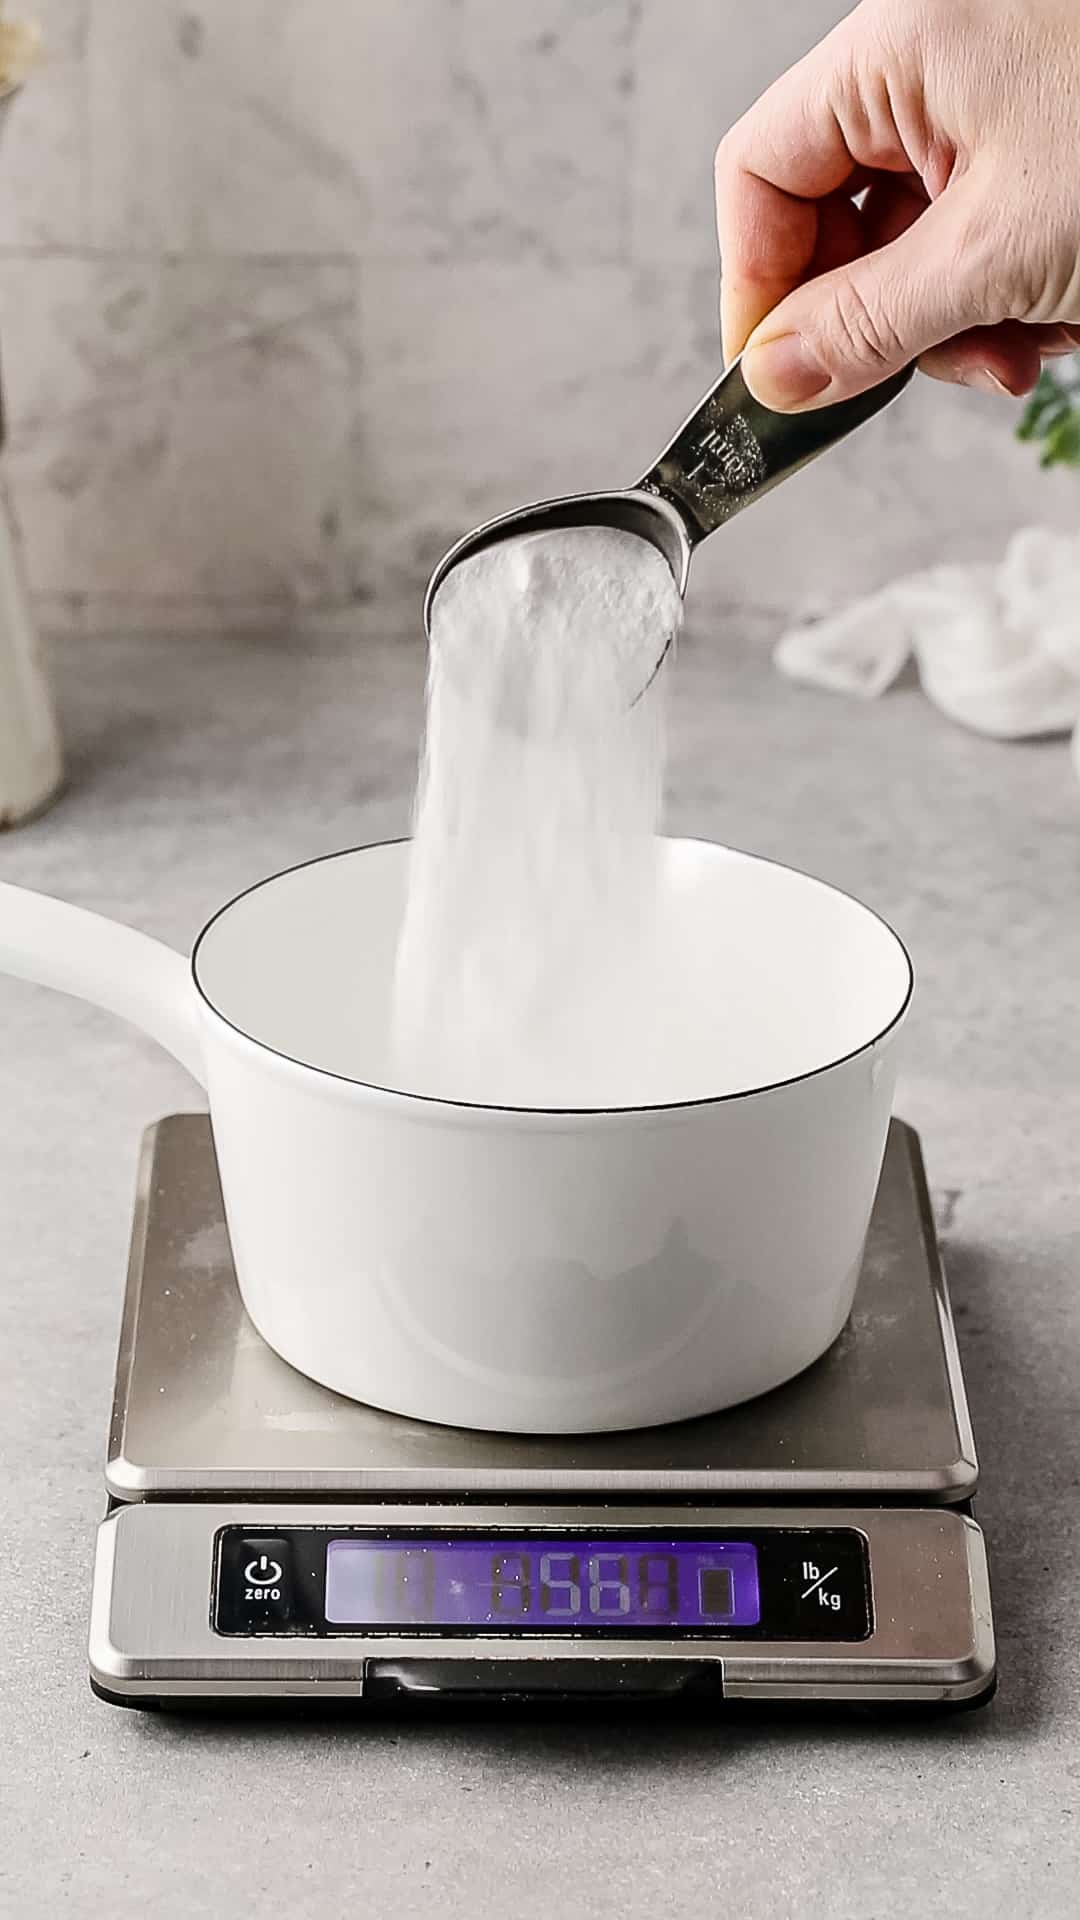 Pouring sugar into a saucepan and weighing it on a food scale.